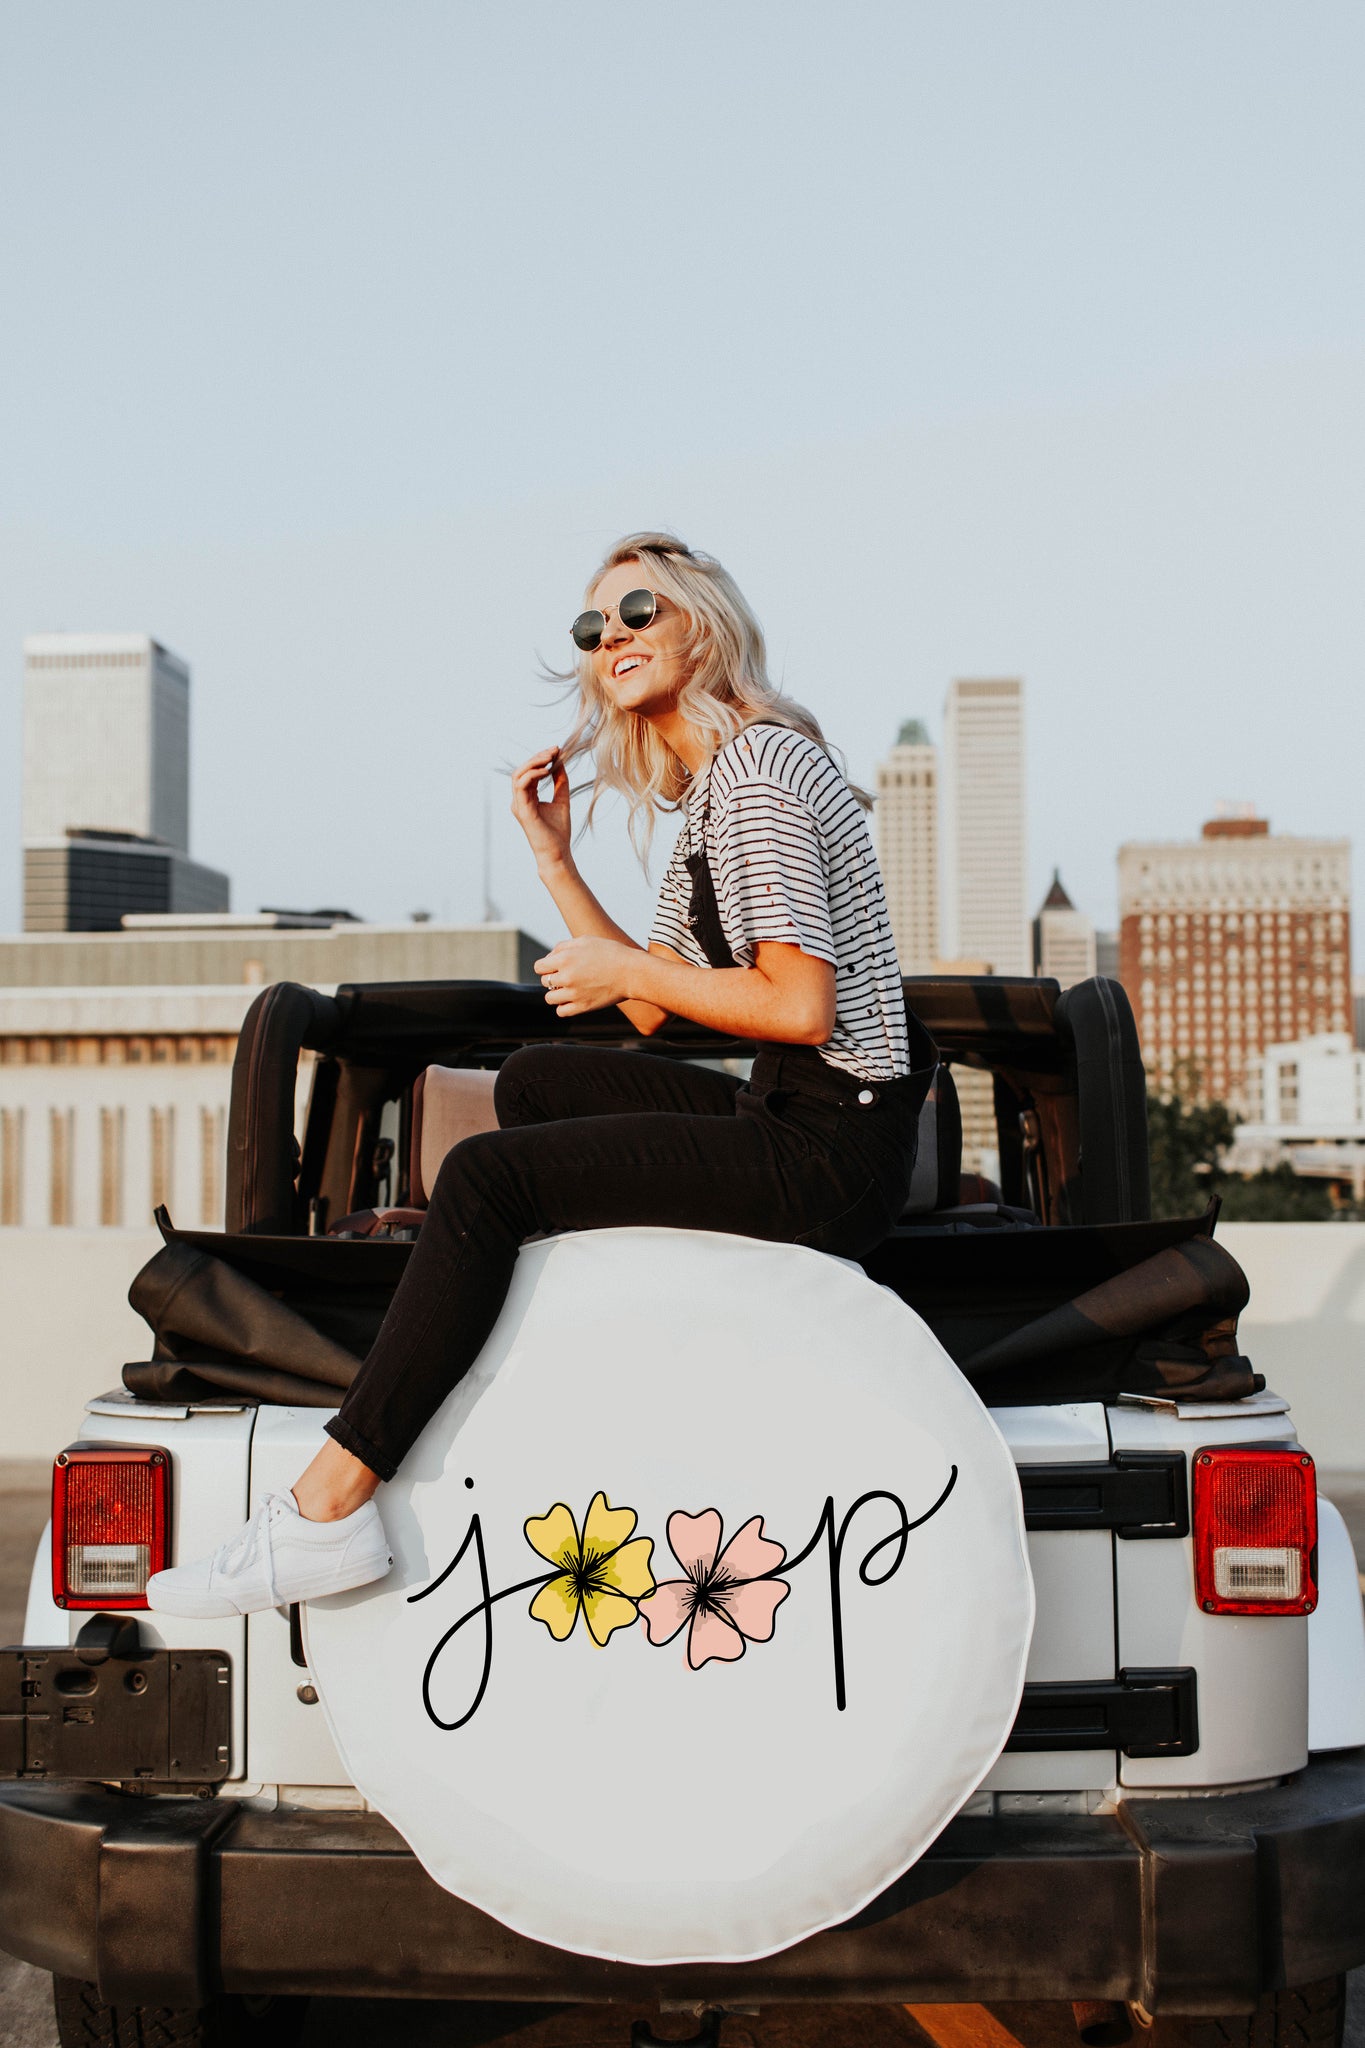 Floral Jeep Tire Cover with Yellow and Pink Flowers – The Tire Cover Shop